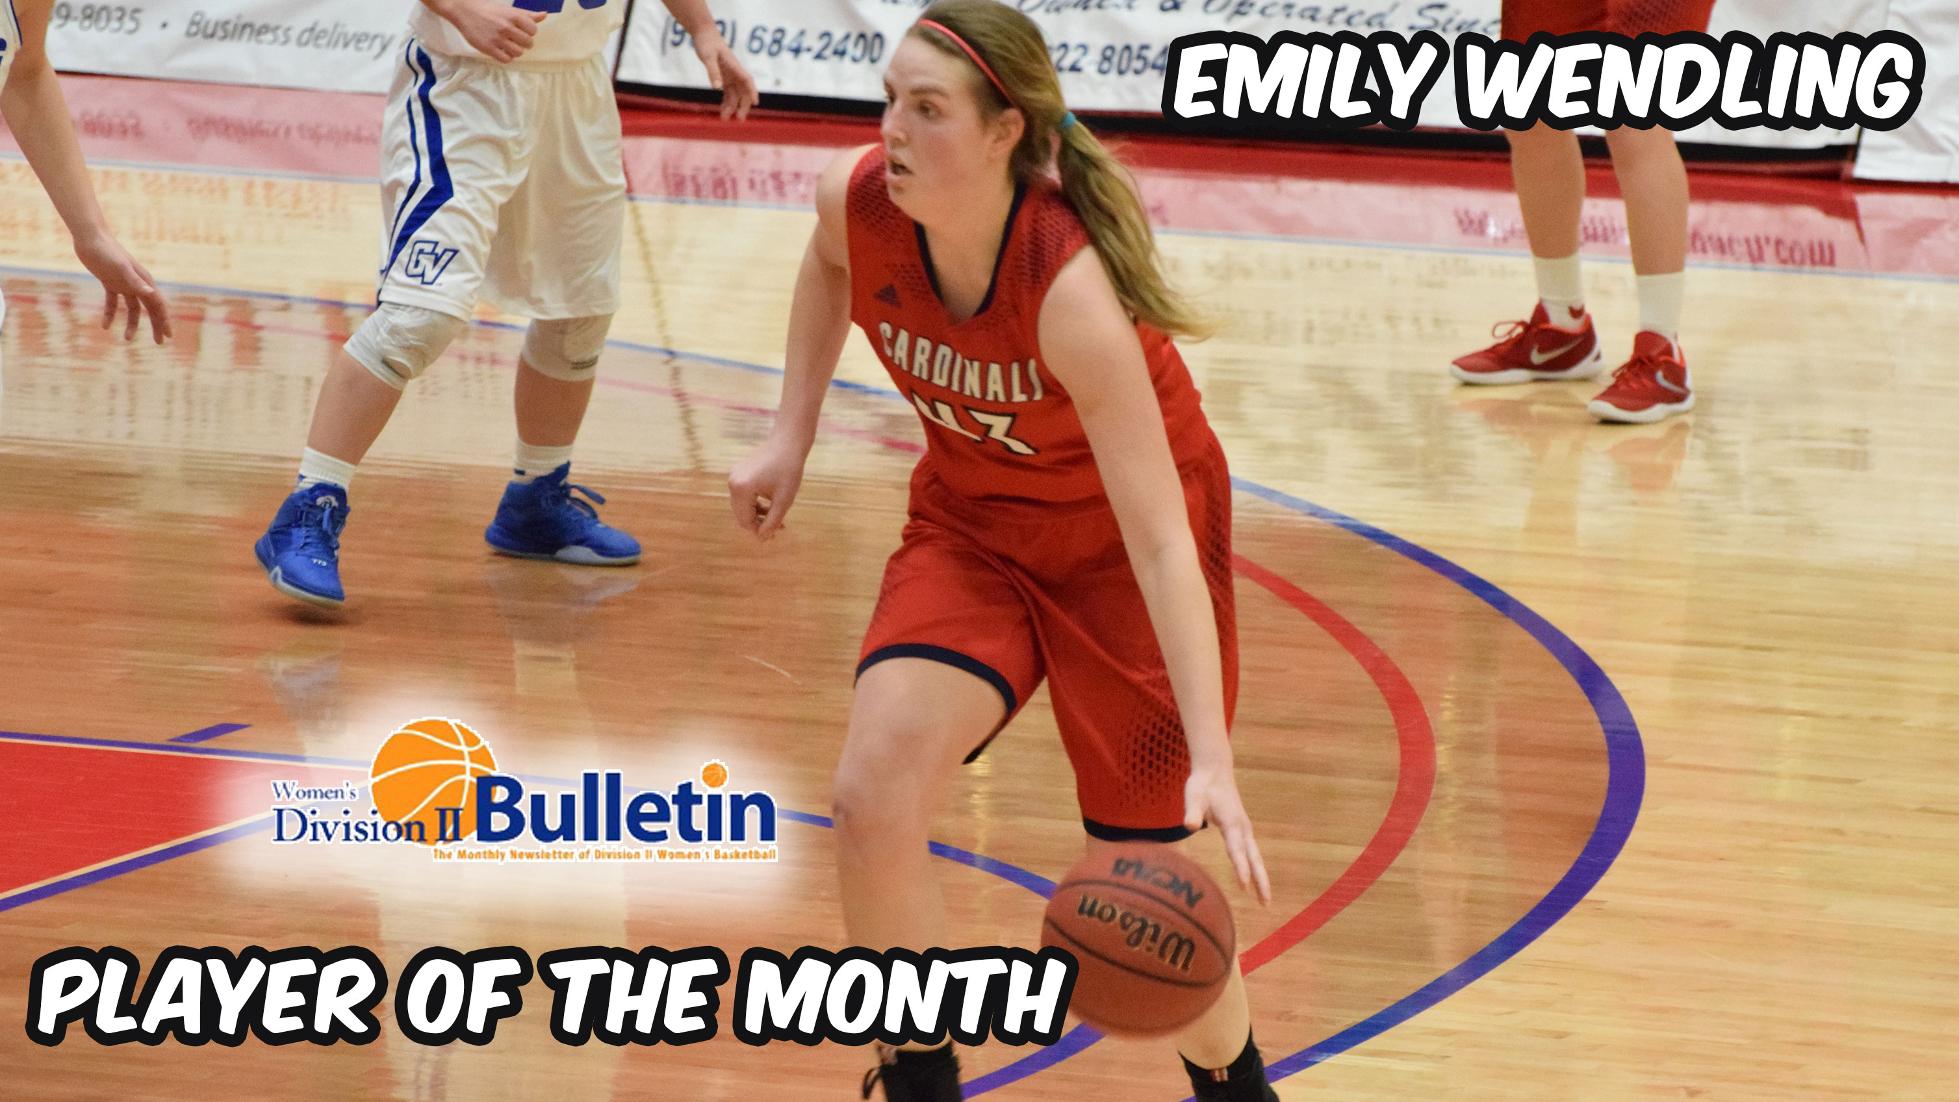 Wendling Named Women's Division II Bulletin Player of the Month